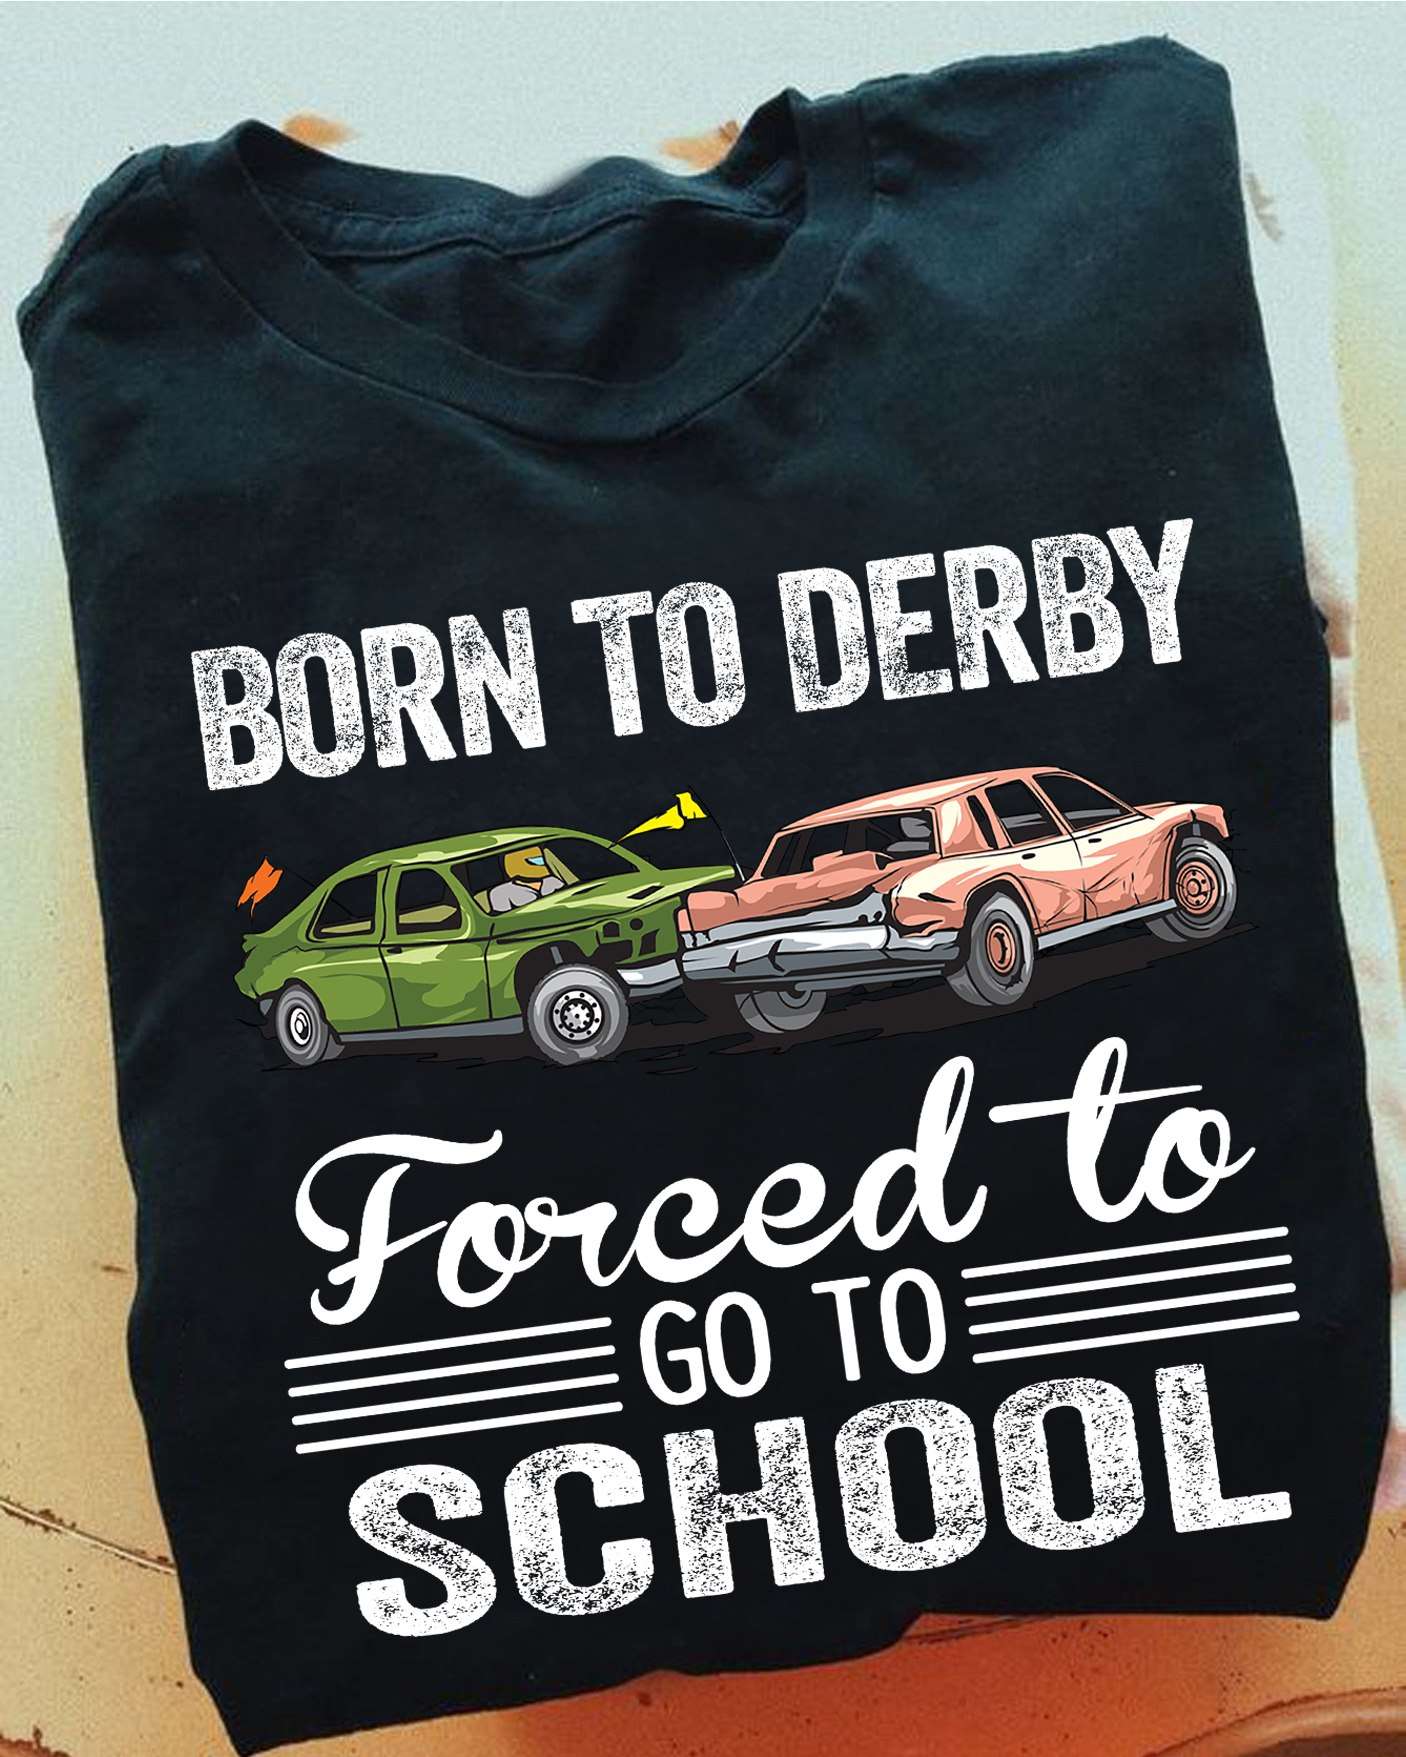 Derby Race Car - Born to derby forced to go to school